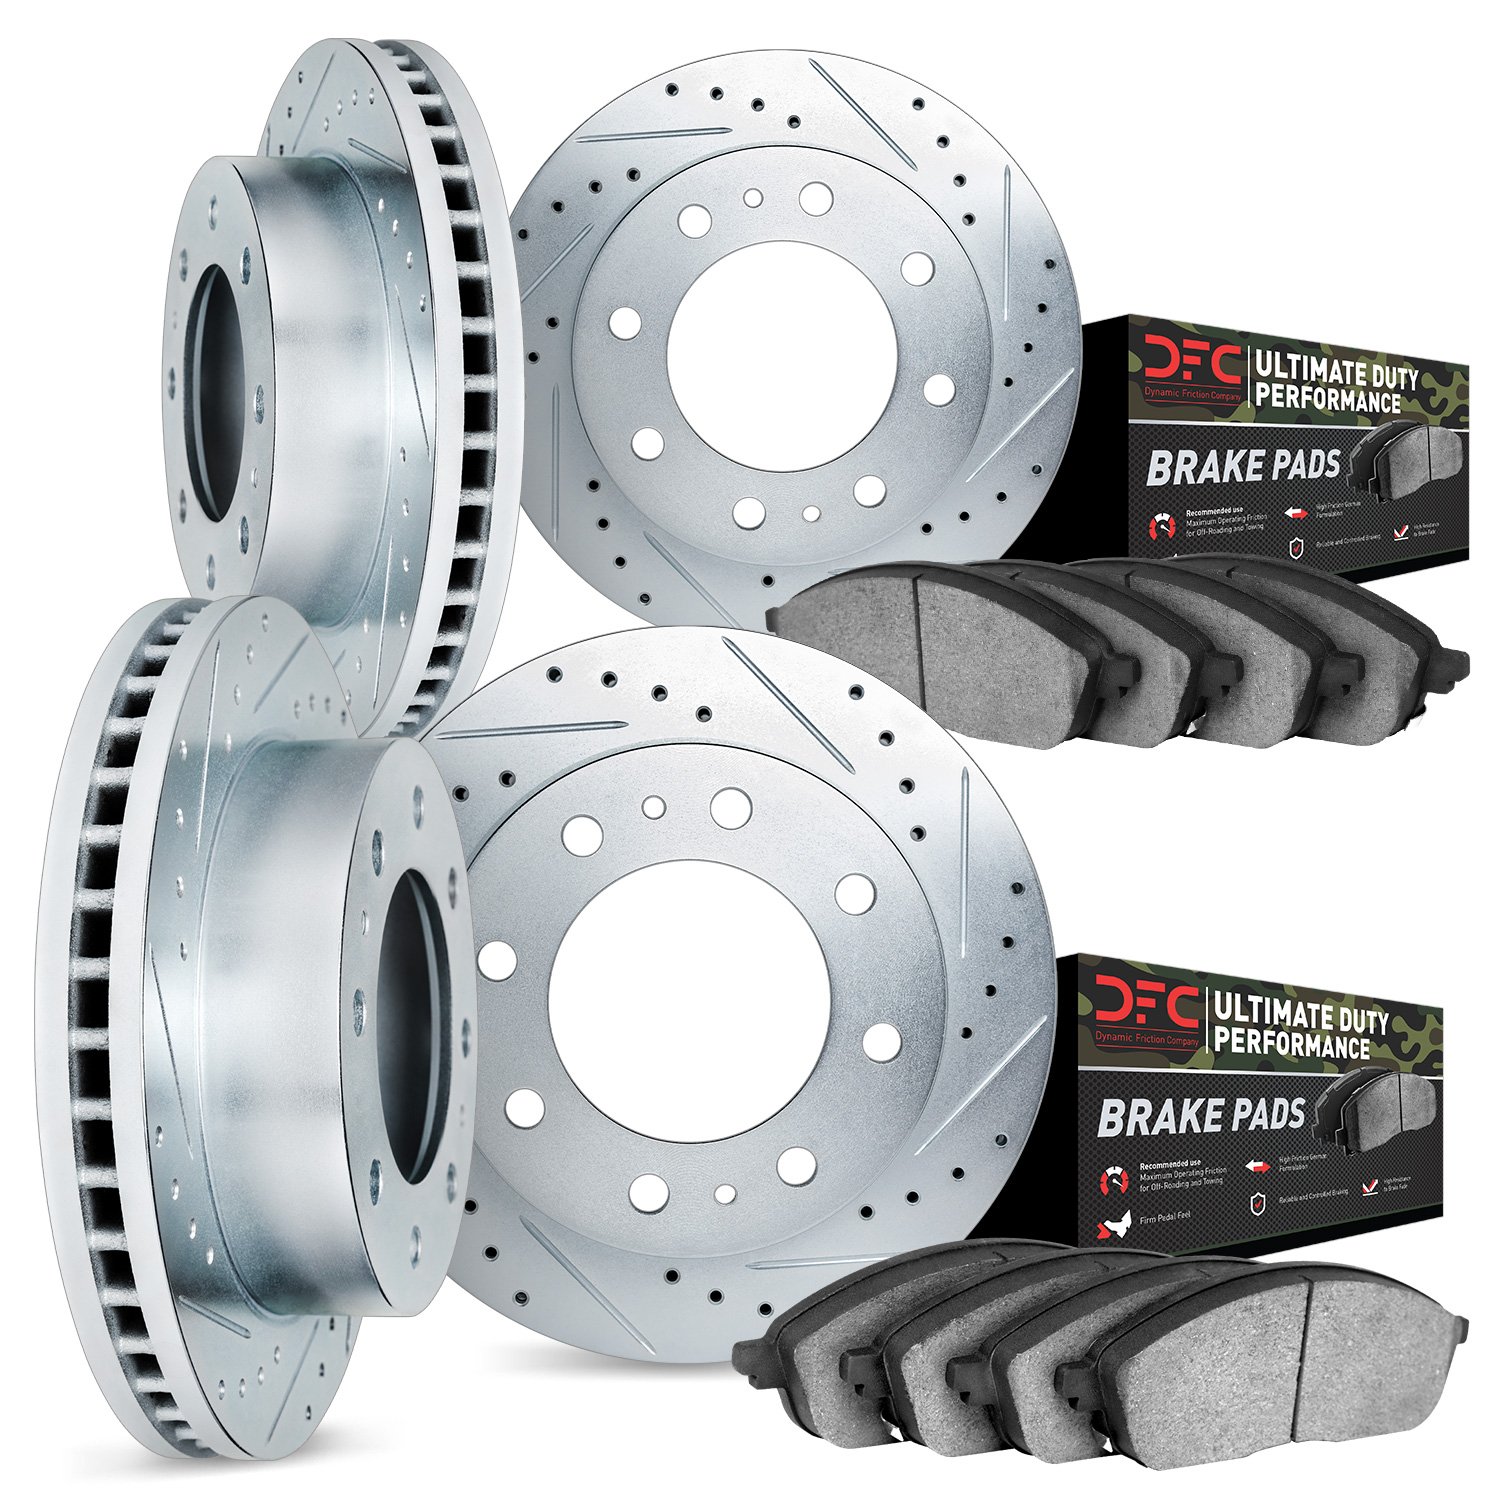 7404-54011 Drilled/Slotted Brake Rotors with Ultimate-Duty Brake Pads Kit [Silver], 1999-1999 Ford/Lincoln/Mercury/Mazda, Positi